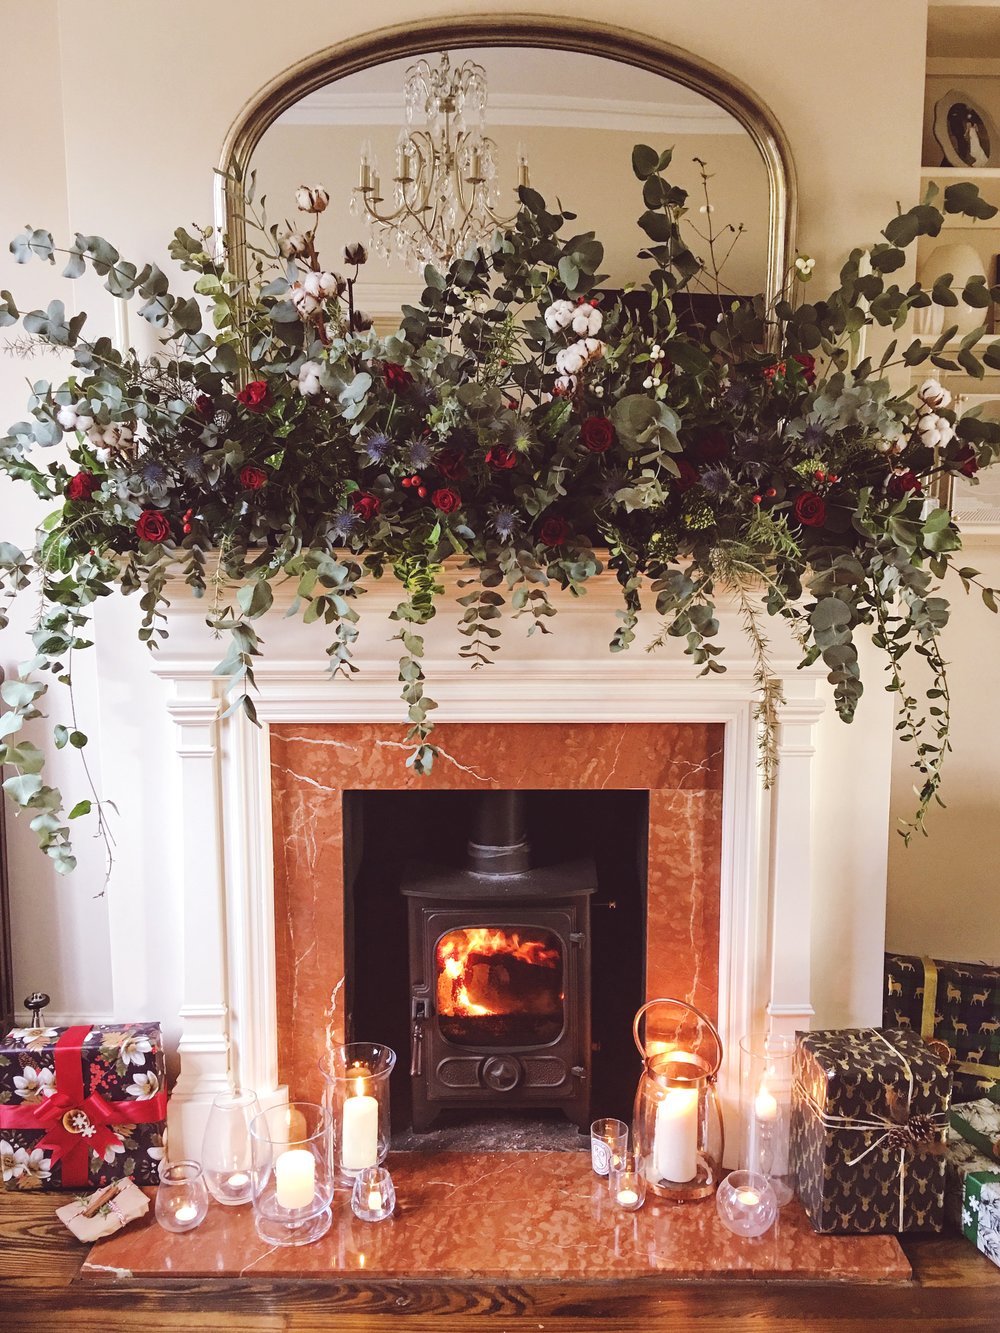 Welcome to my house at Christmas! If you are joining me as part of the UK  Blog Hop from We Love Home